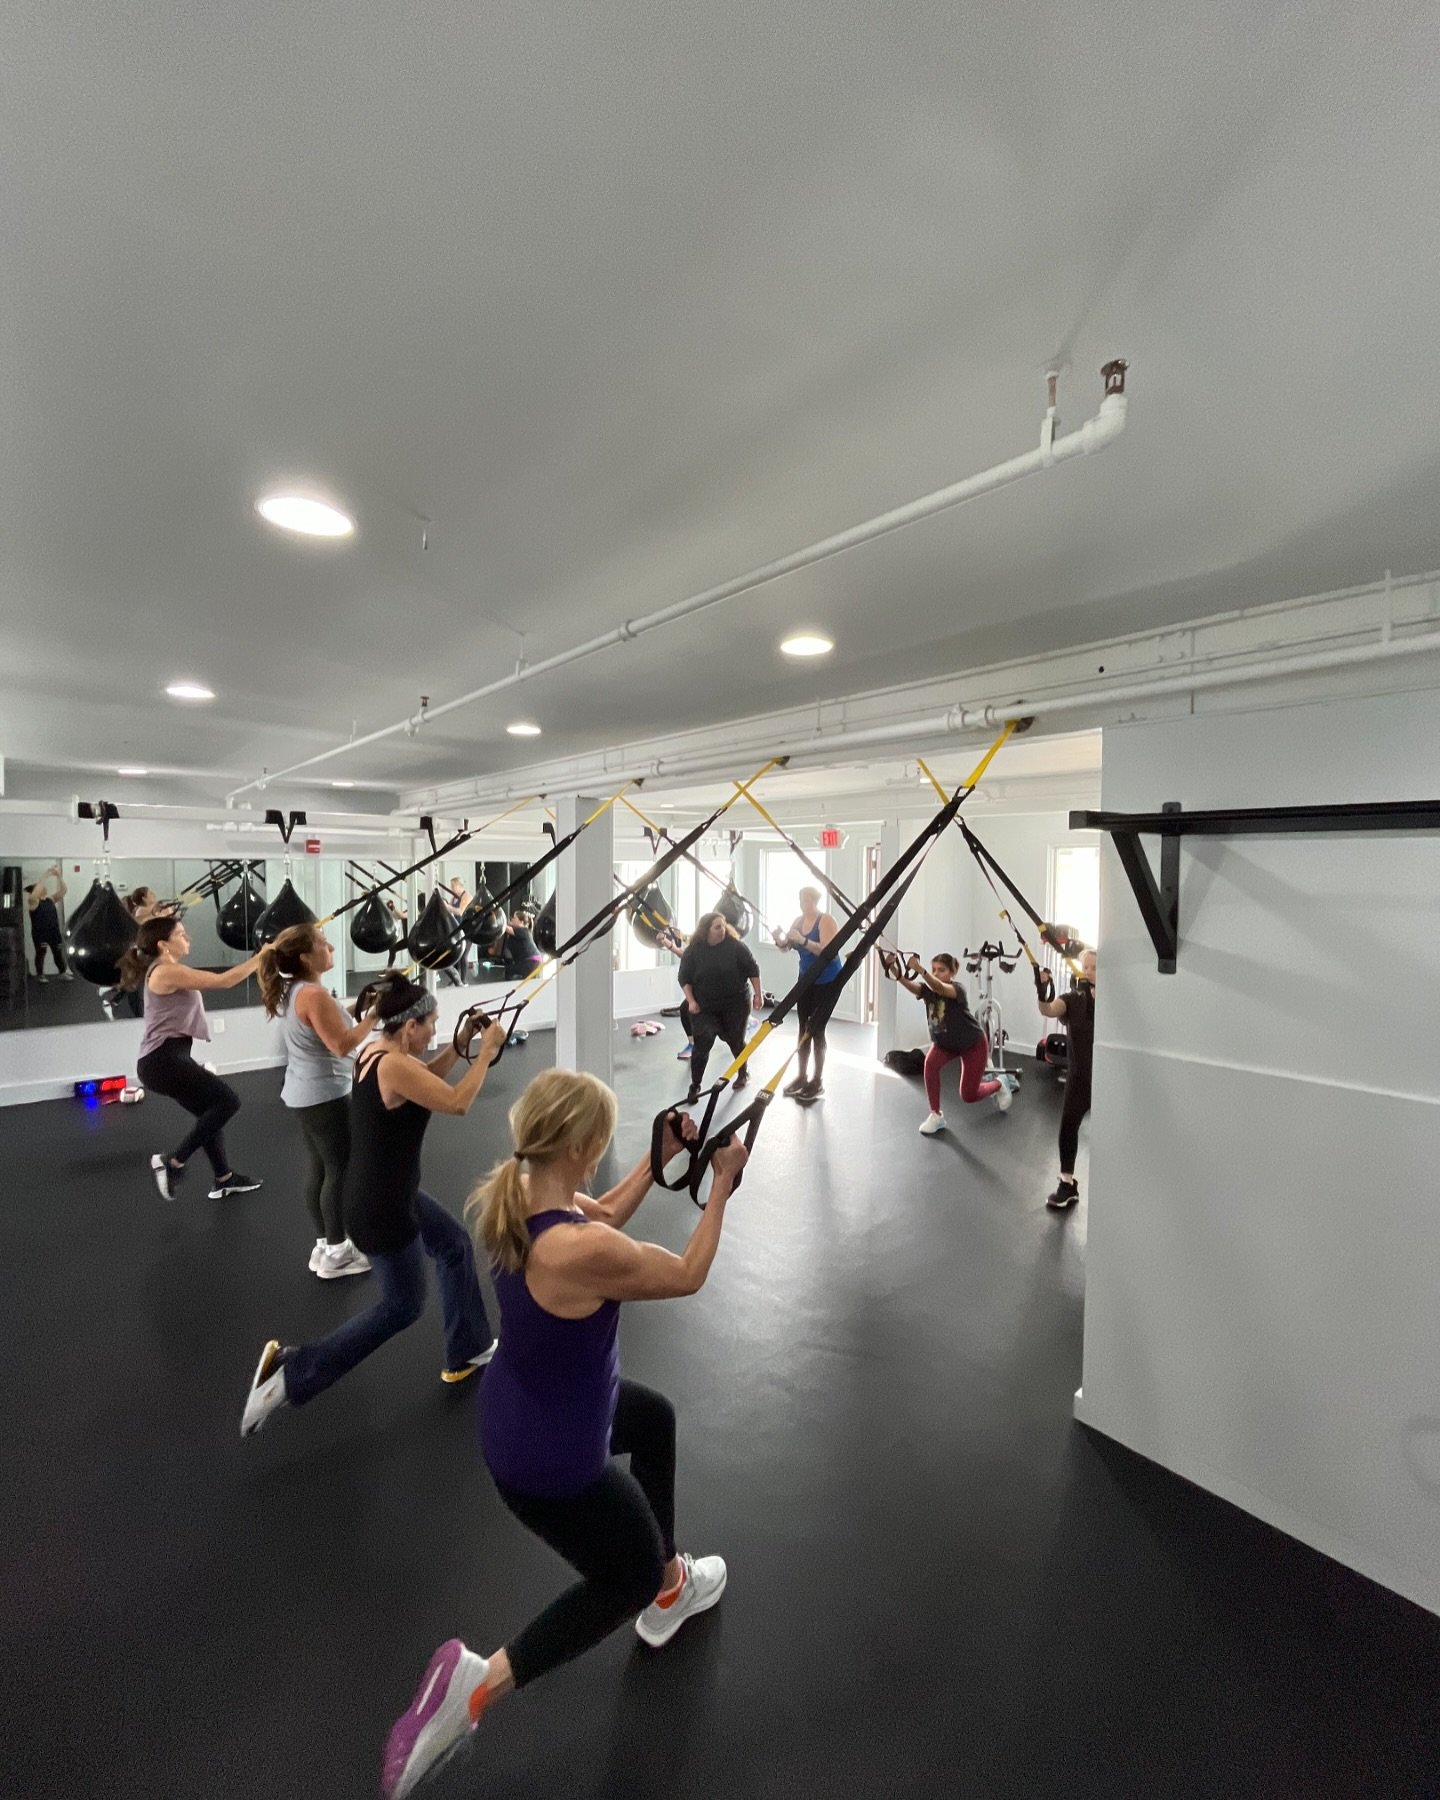 It might be April but we sure do love a TRX maypole! 🤩

Head to barrecoast.com, click Studios, and learn more about all we have to offer! 🩵

#barrecoast #barrecoastcommunity #trx #trxworkout #trxlunge #trxexercises #groupfitness #maypole #westerlyr